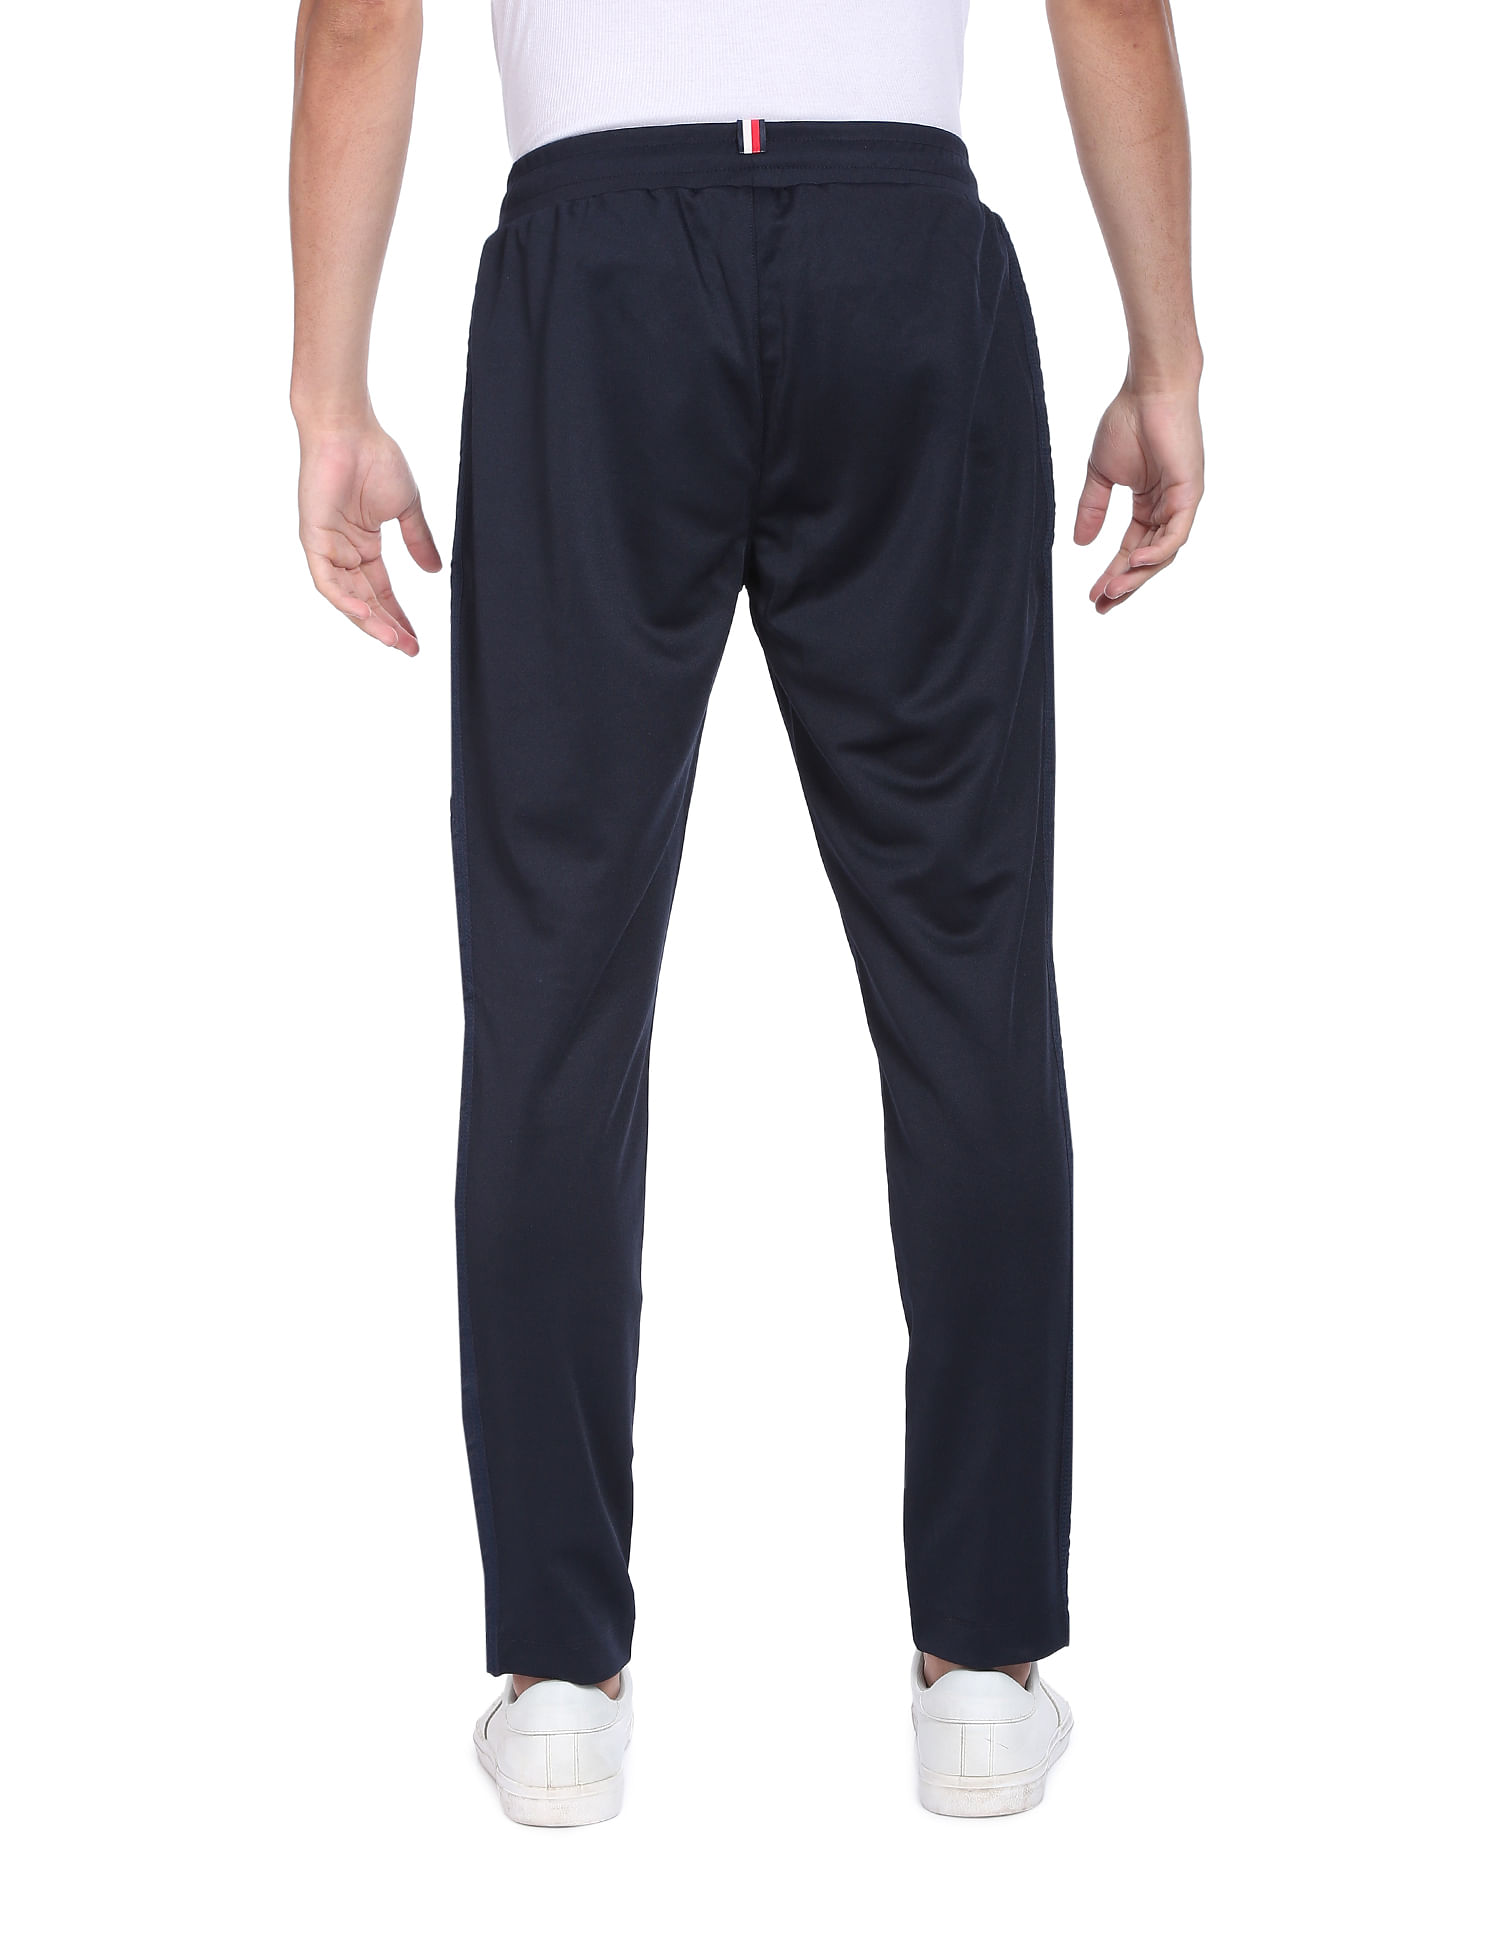 US POLO ASSN Trackpants  Buy US POLO ASSN Men Black I718 Natural Polyester  Track Pants  Pack Of 1 Online  Nykaa Fashion